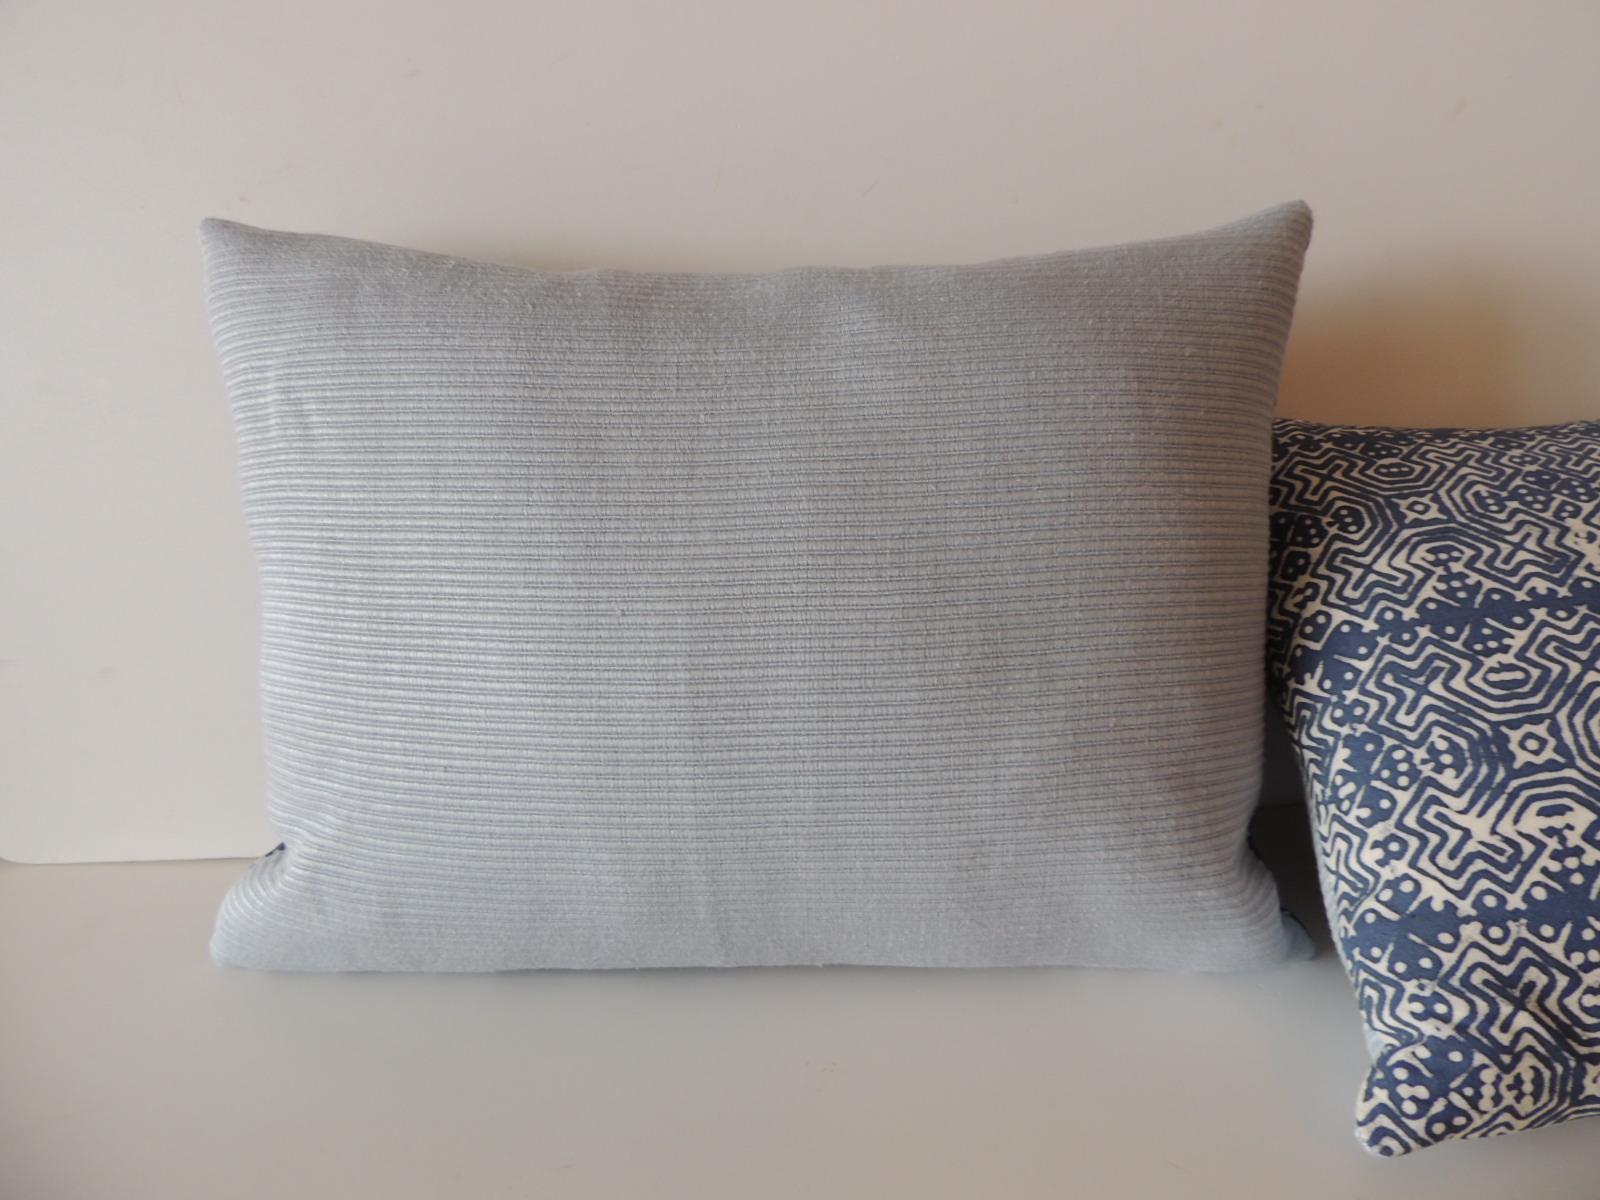 Hand-Crafted Pair of Vintage Blue and White Petite Hand-Blocked Batik Decorative Pillows